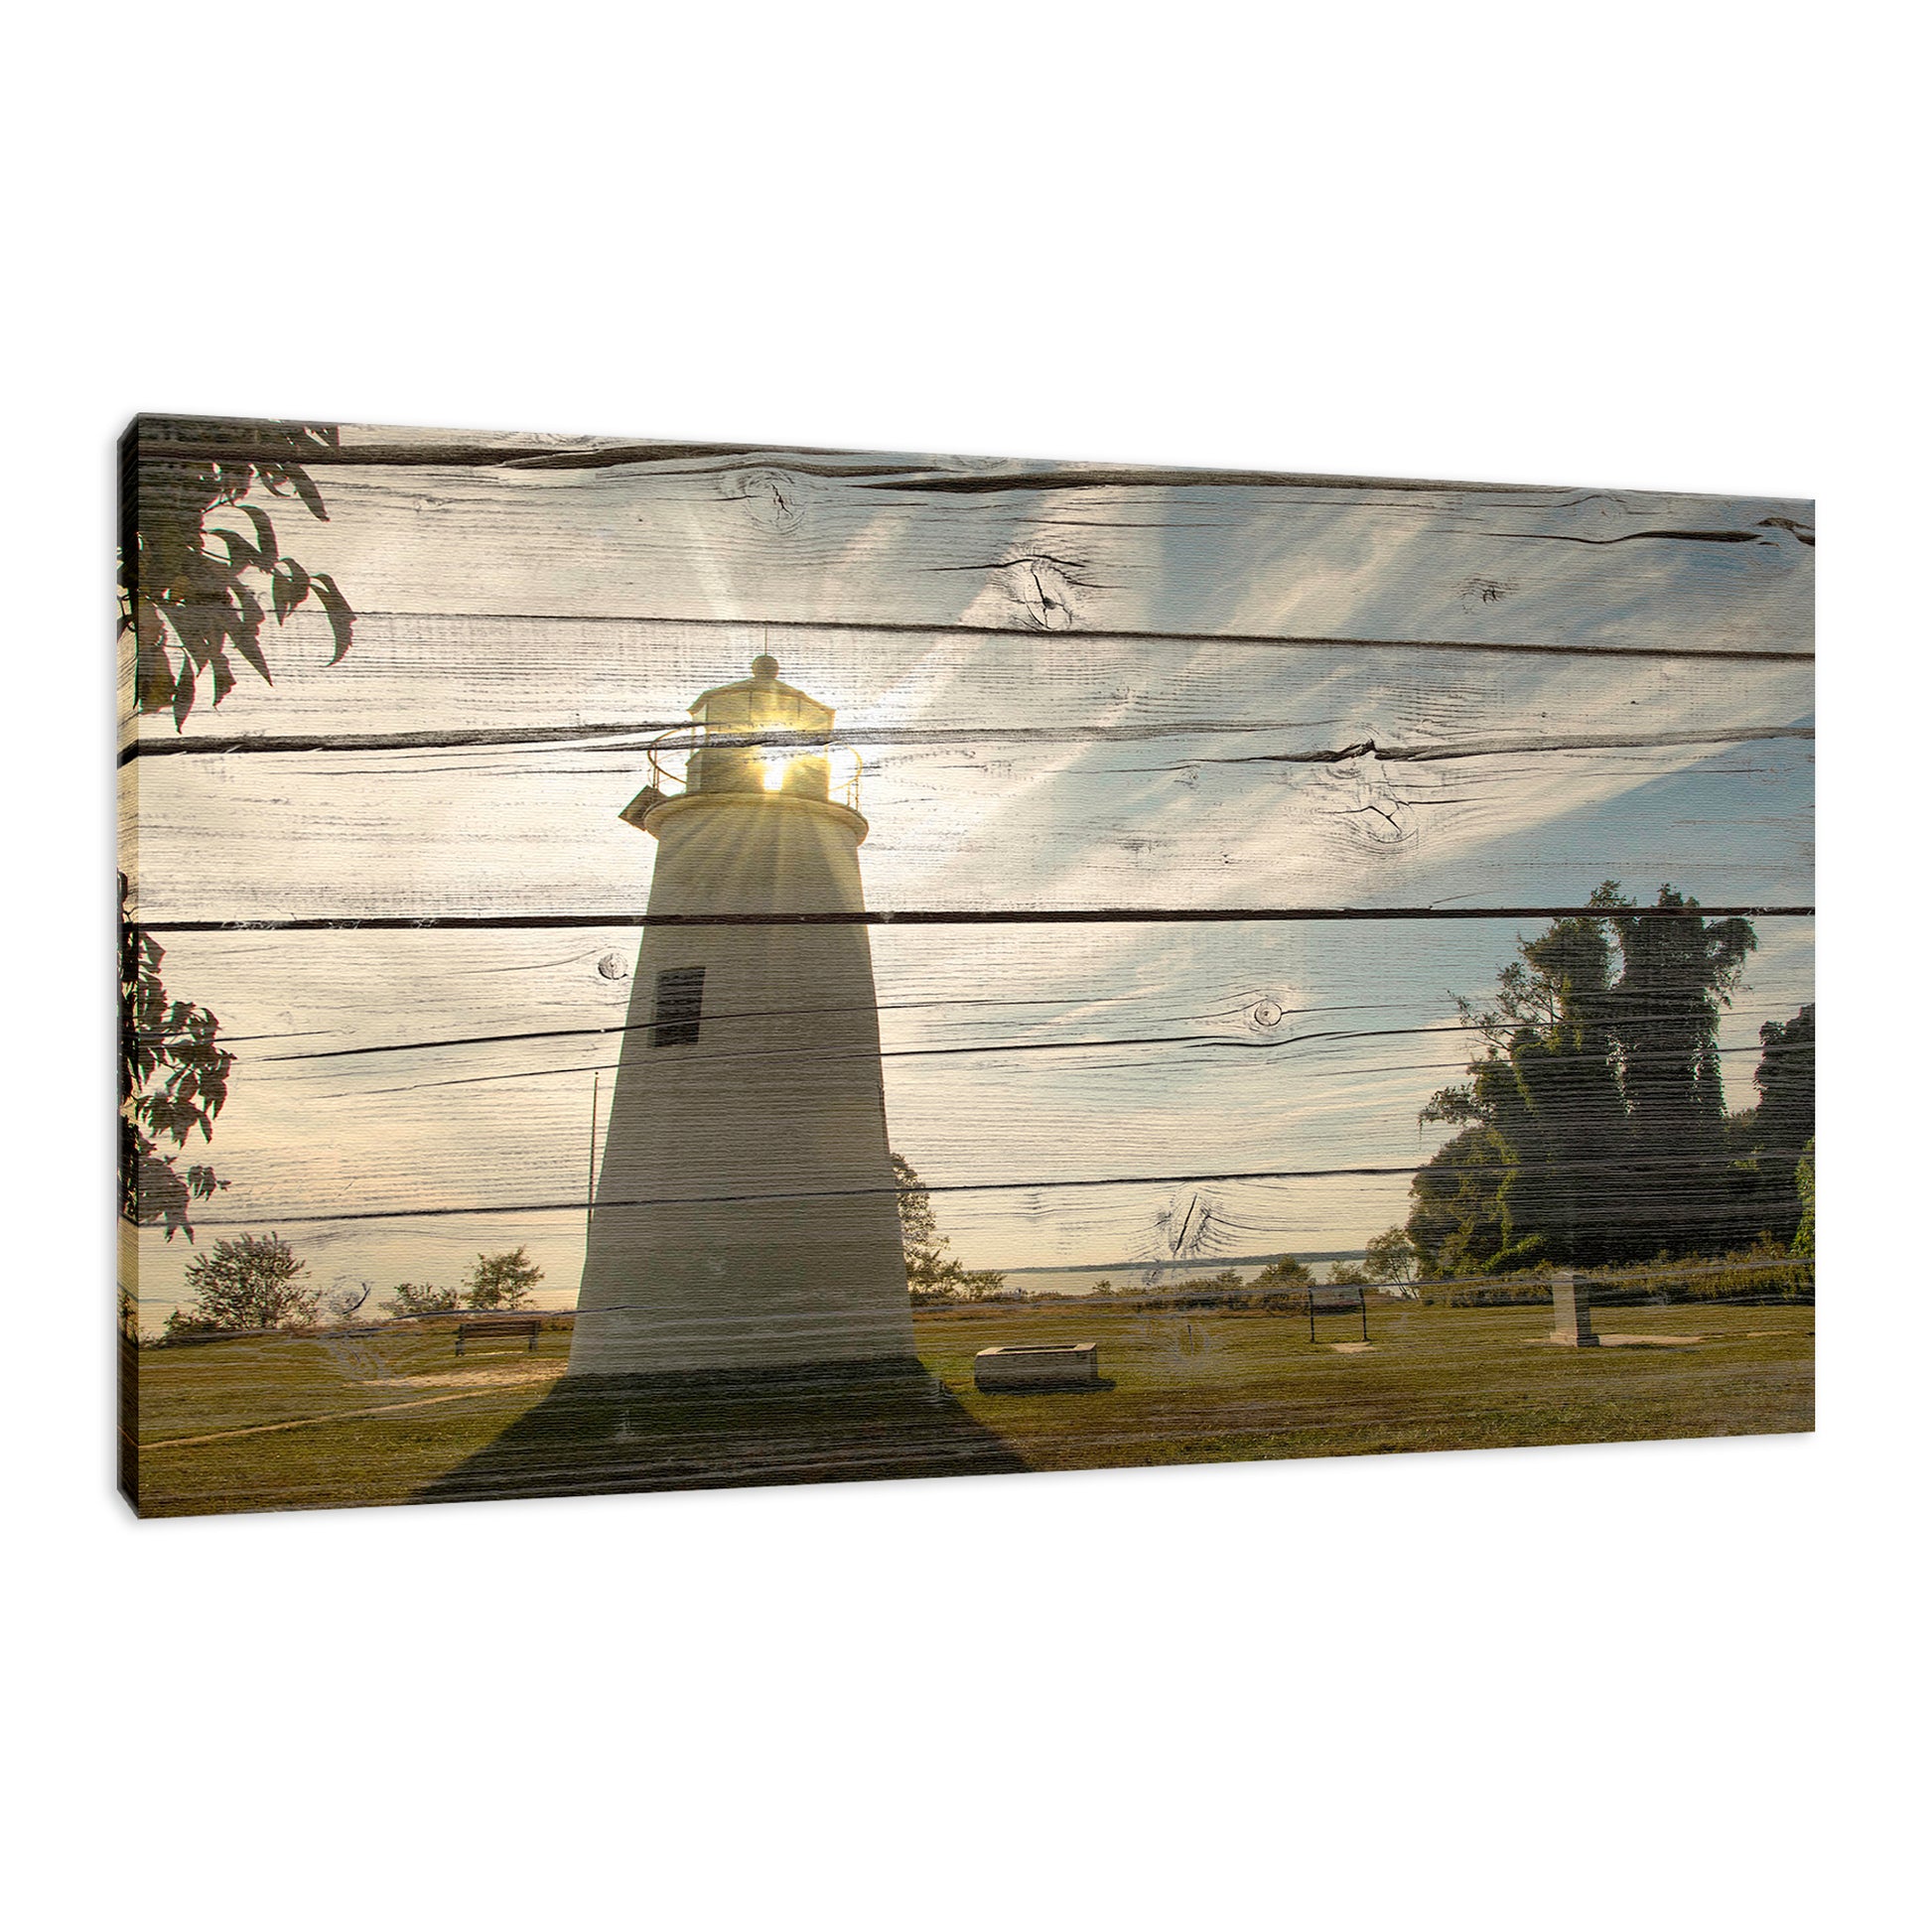 Faux Rustic Reclaimed Wood Turkey Point Lighthouse Fine Art Canvas Wall Art Prints  - PIPAFINEART